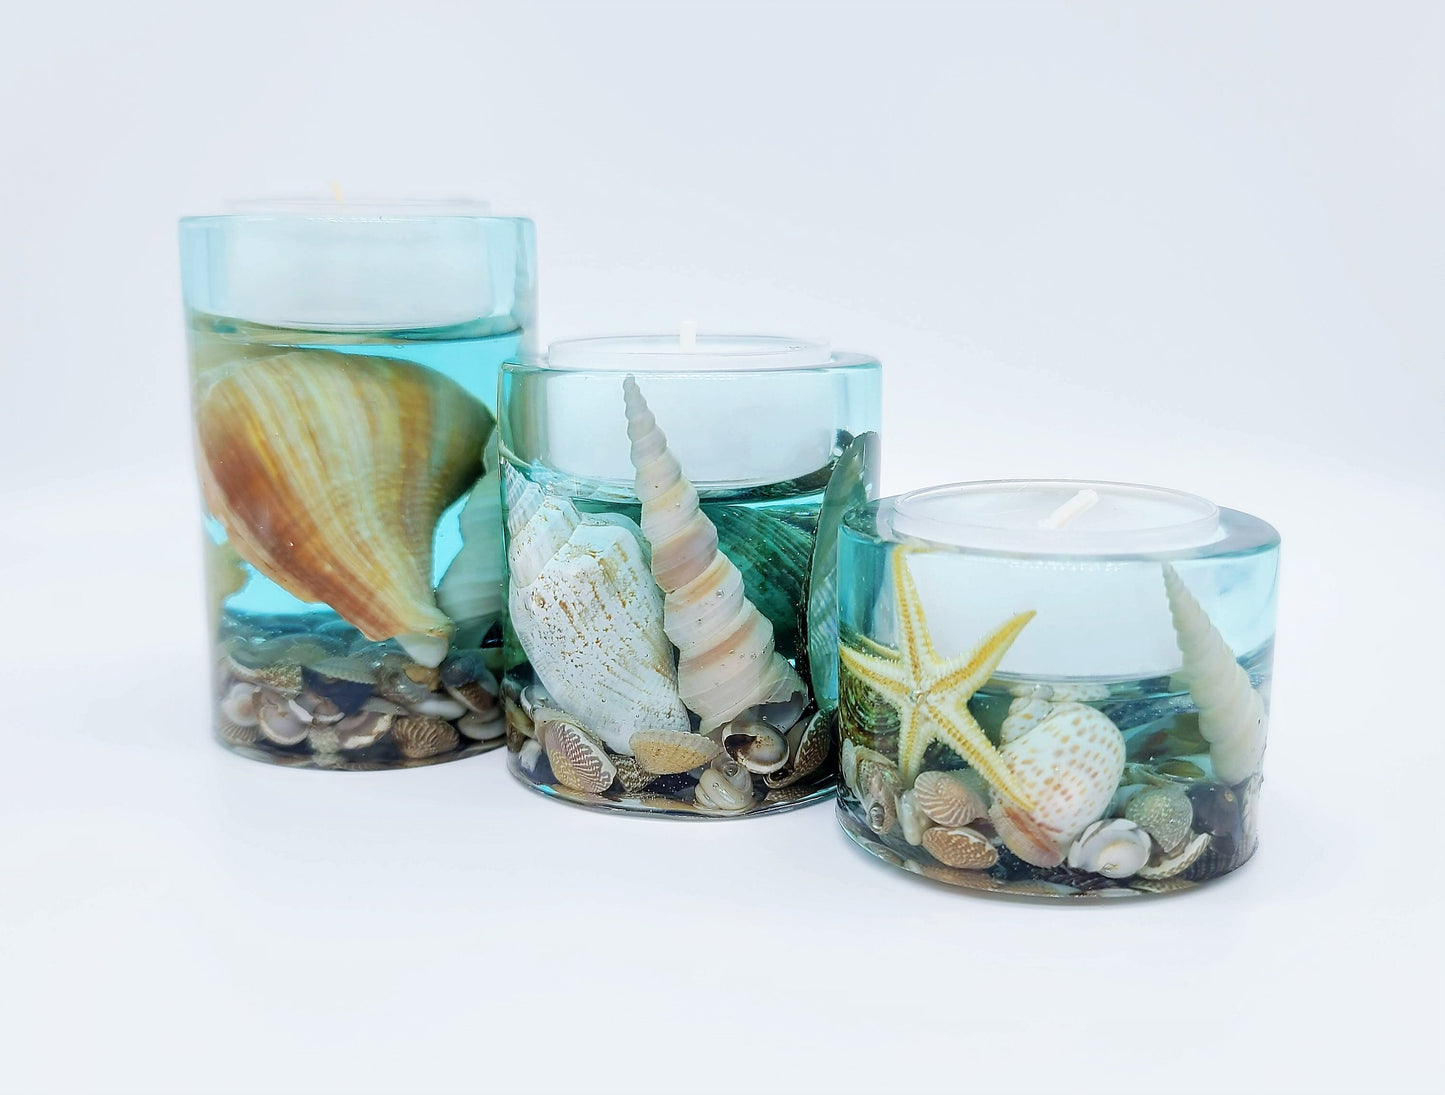 Seascape Candle Holder Made with Eco-Friendly Epoxy Resin and Seashells - Includes Choice of Real SCENTED Tealight or LED Tealight